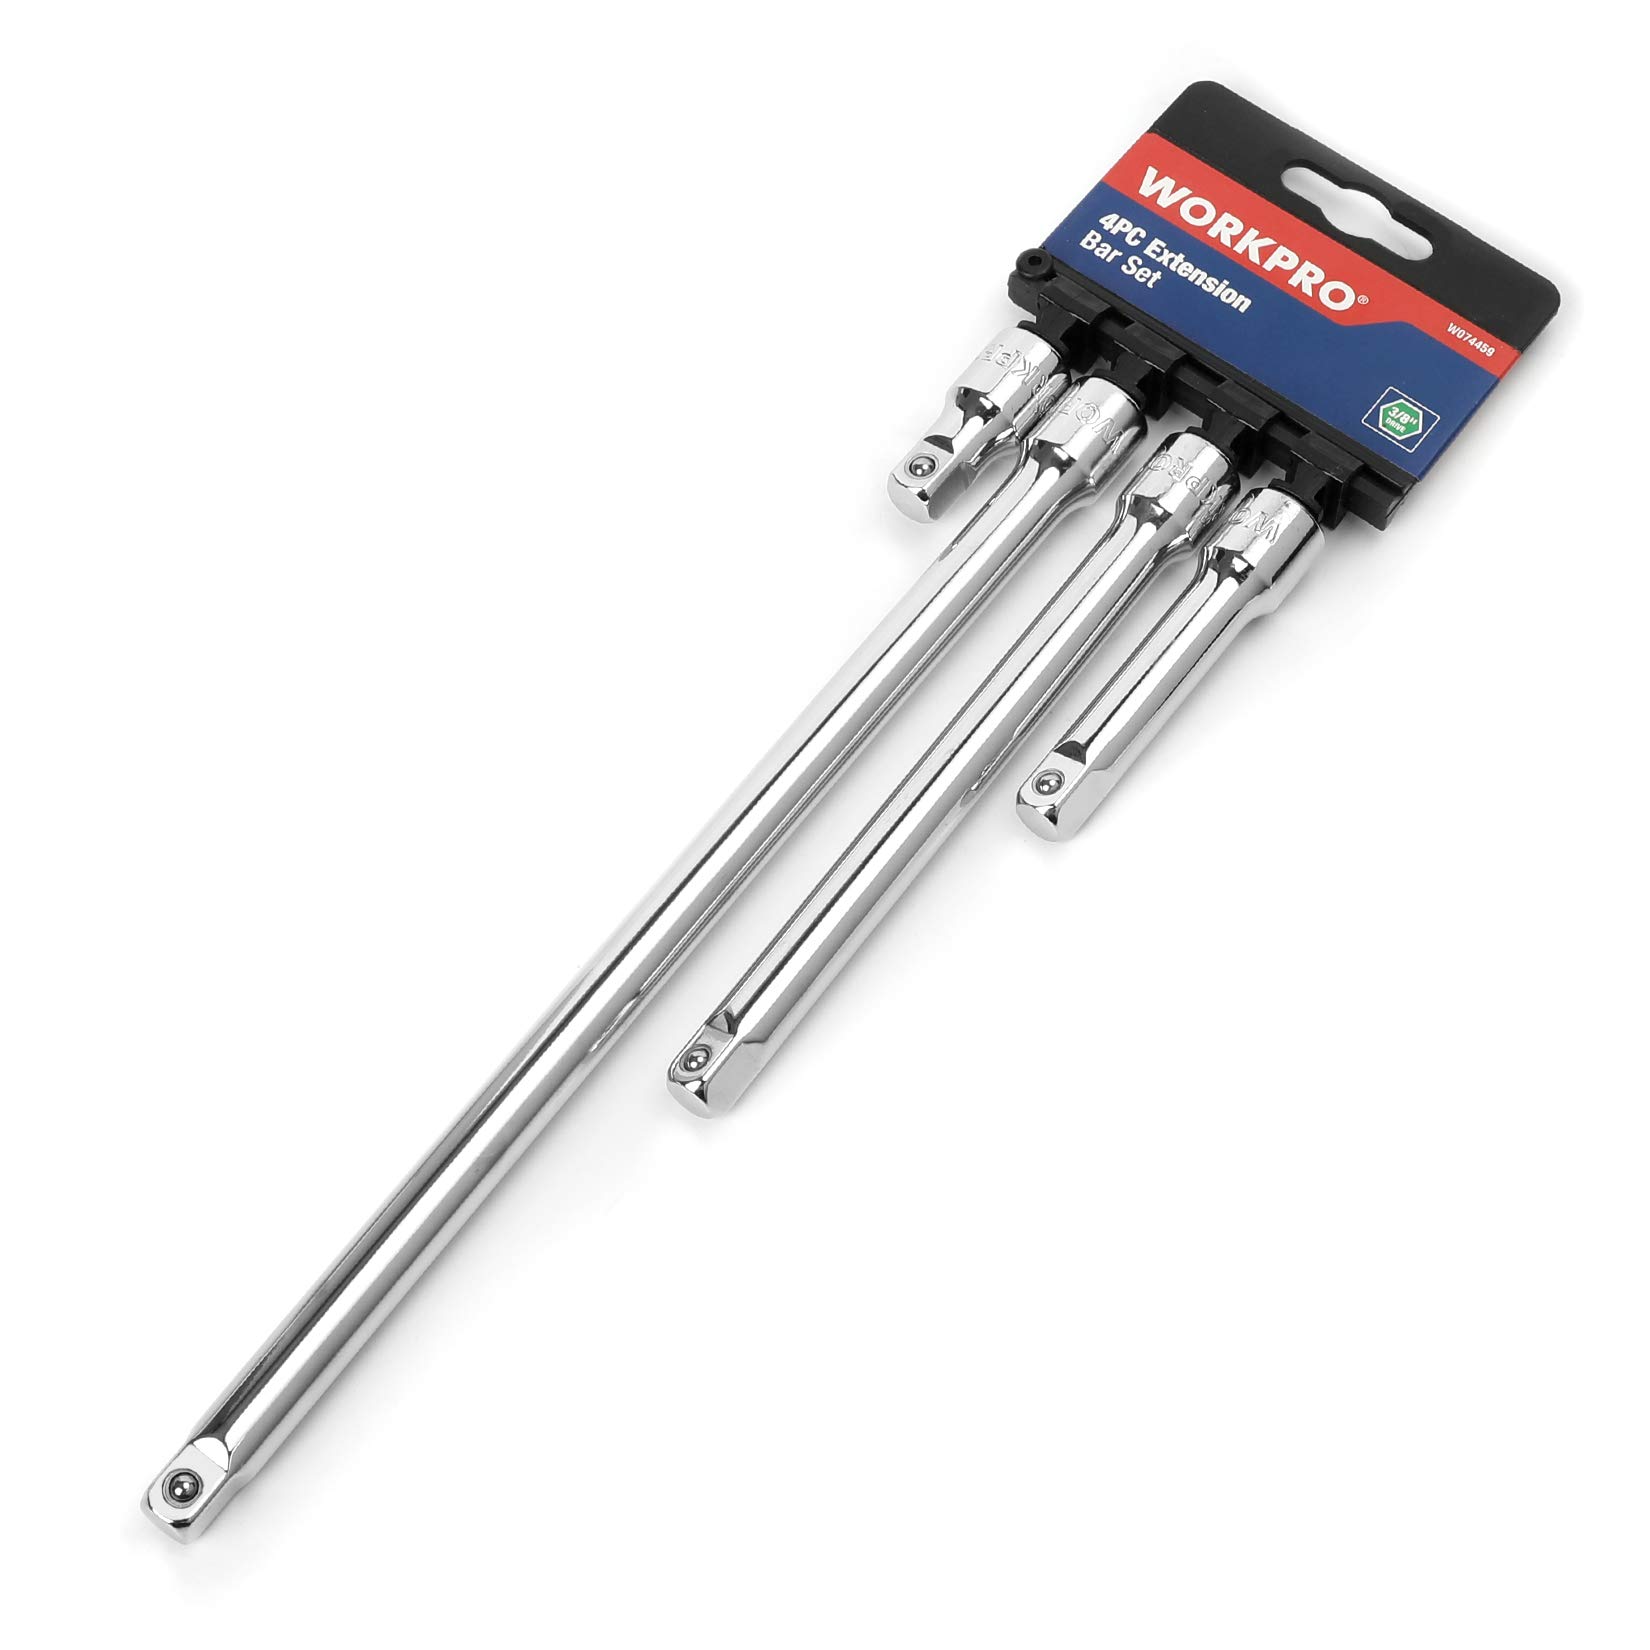 WORKPRO W074459 3/8 In. Socket Drive Extension Bar Set, Heat-Treated Steel Construction (Single Pack) $9